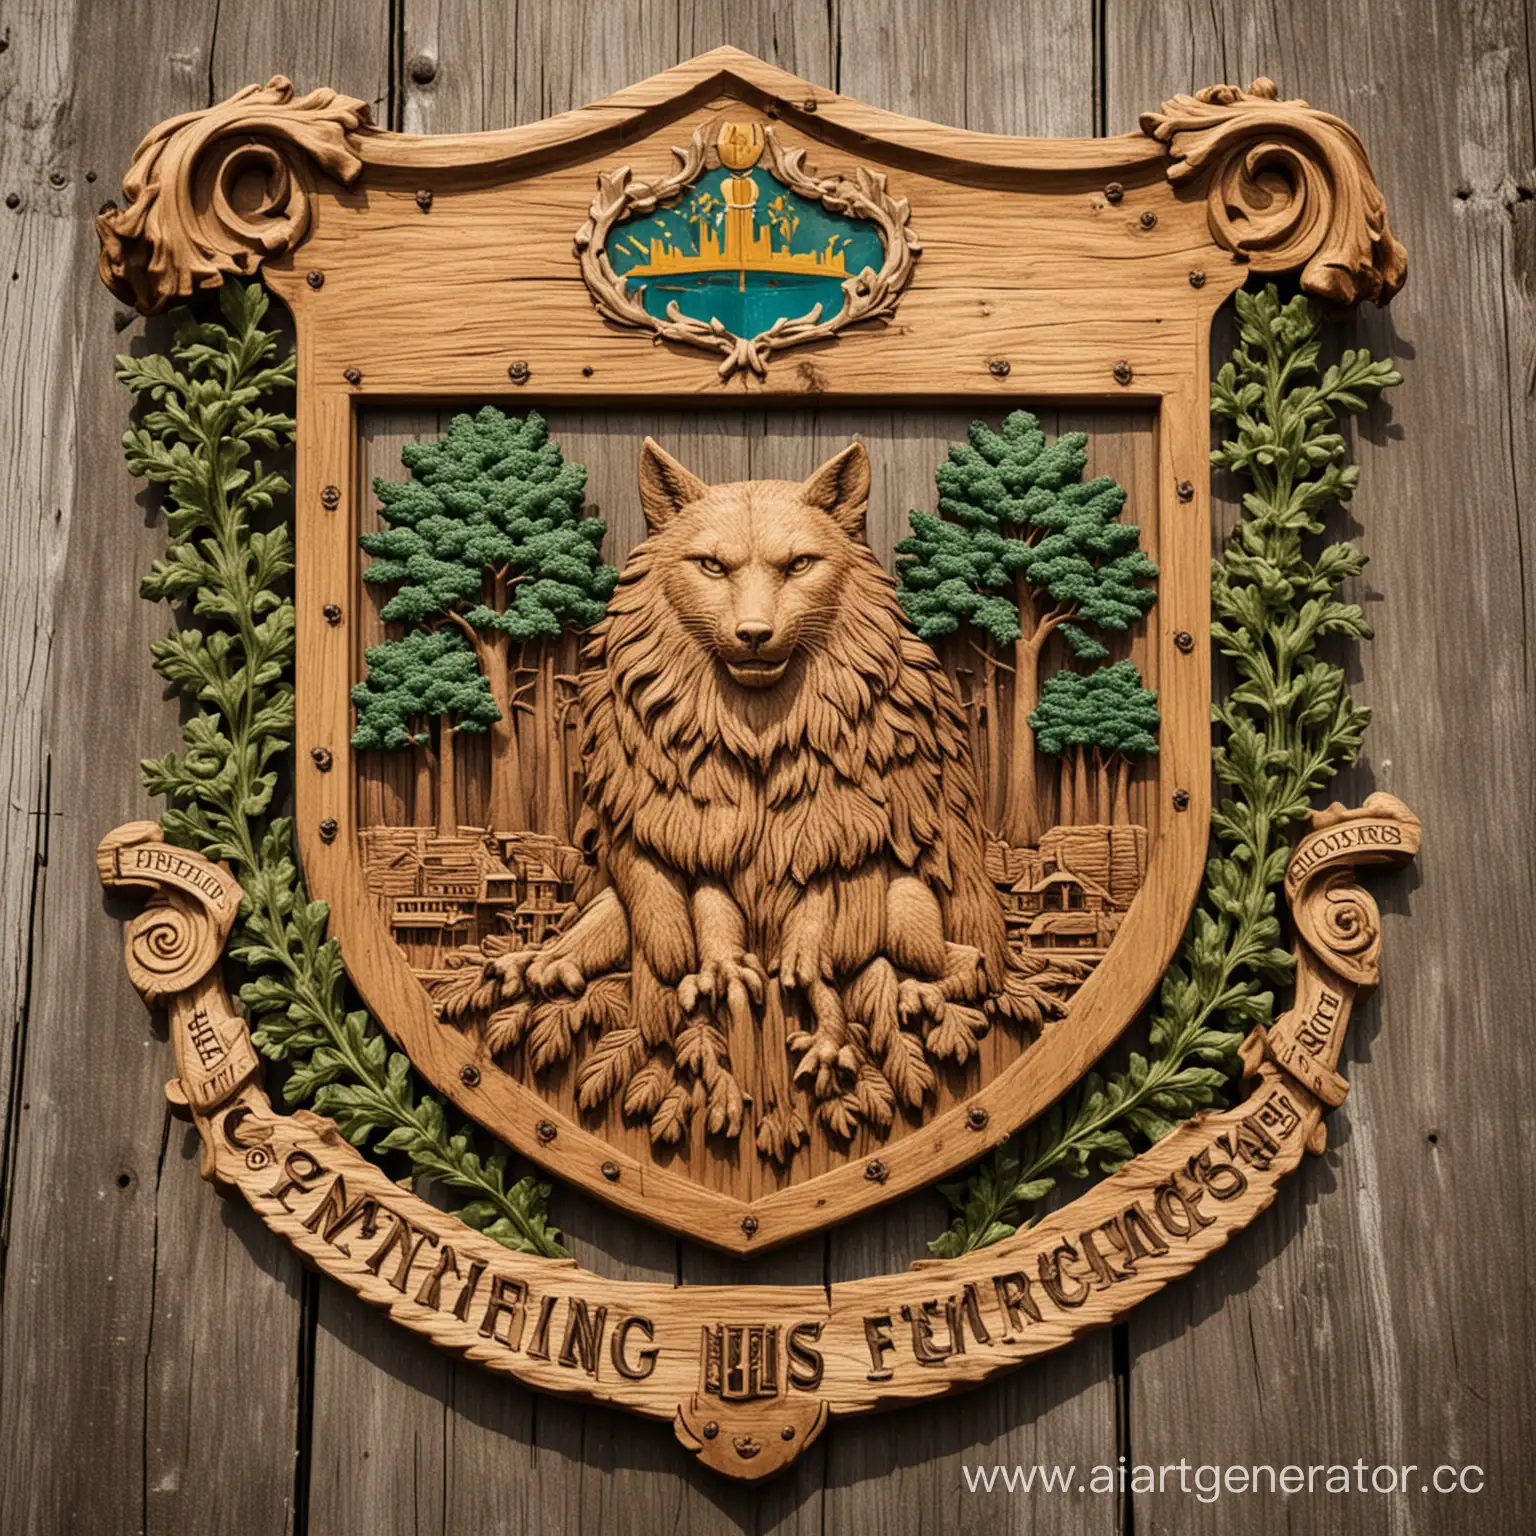 Coat-of-Arms-of-an-American-City-Symbolizing-Deforestation